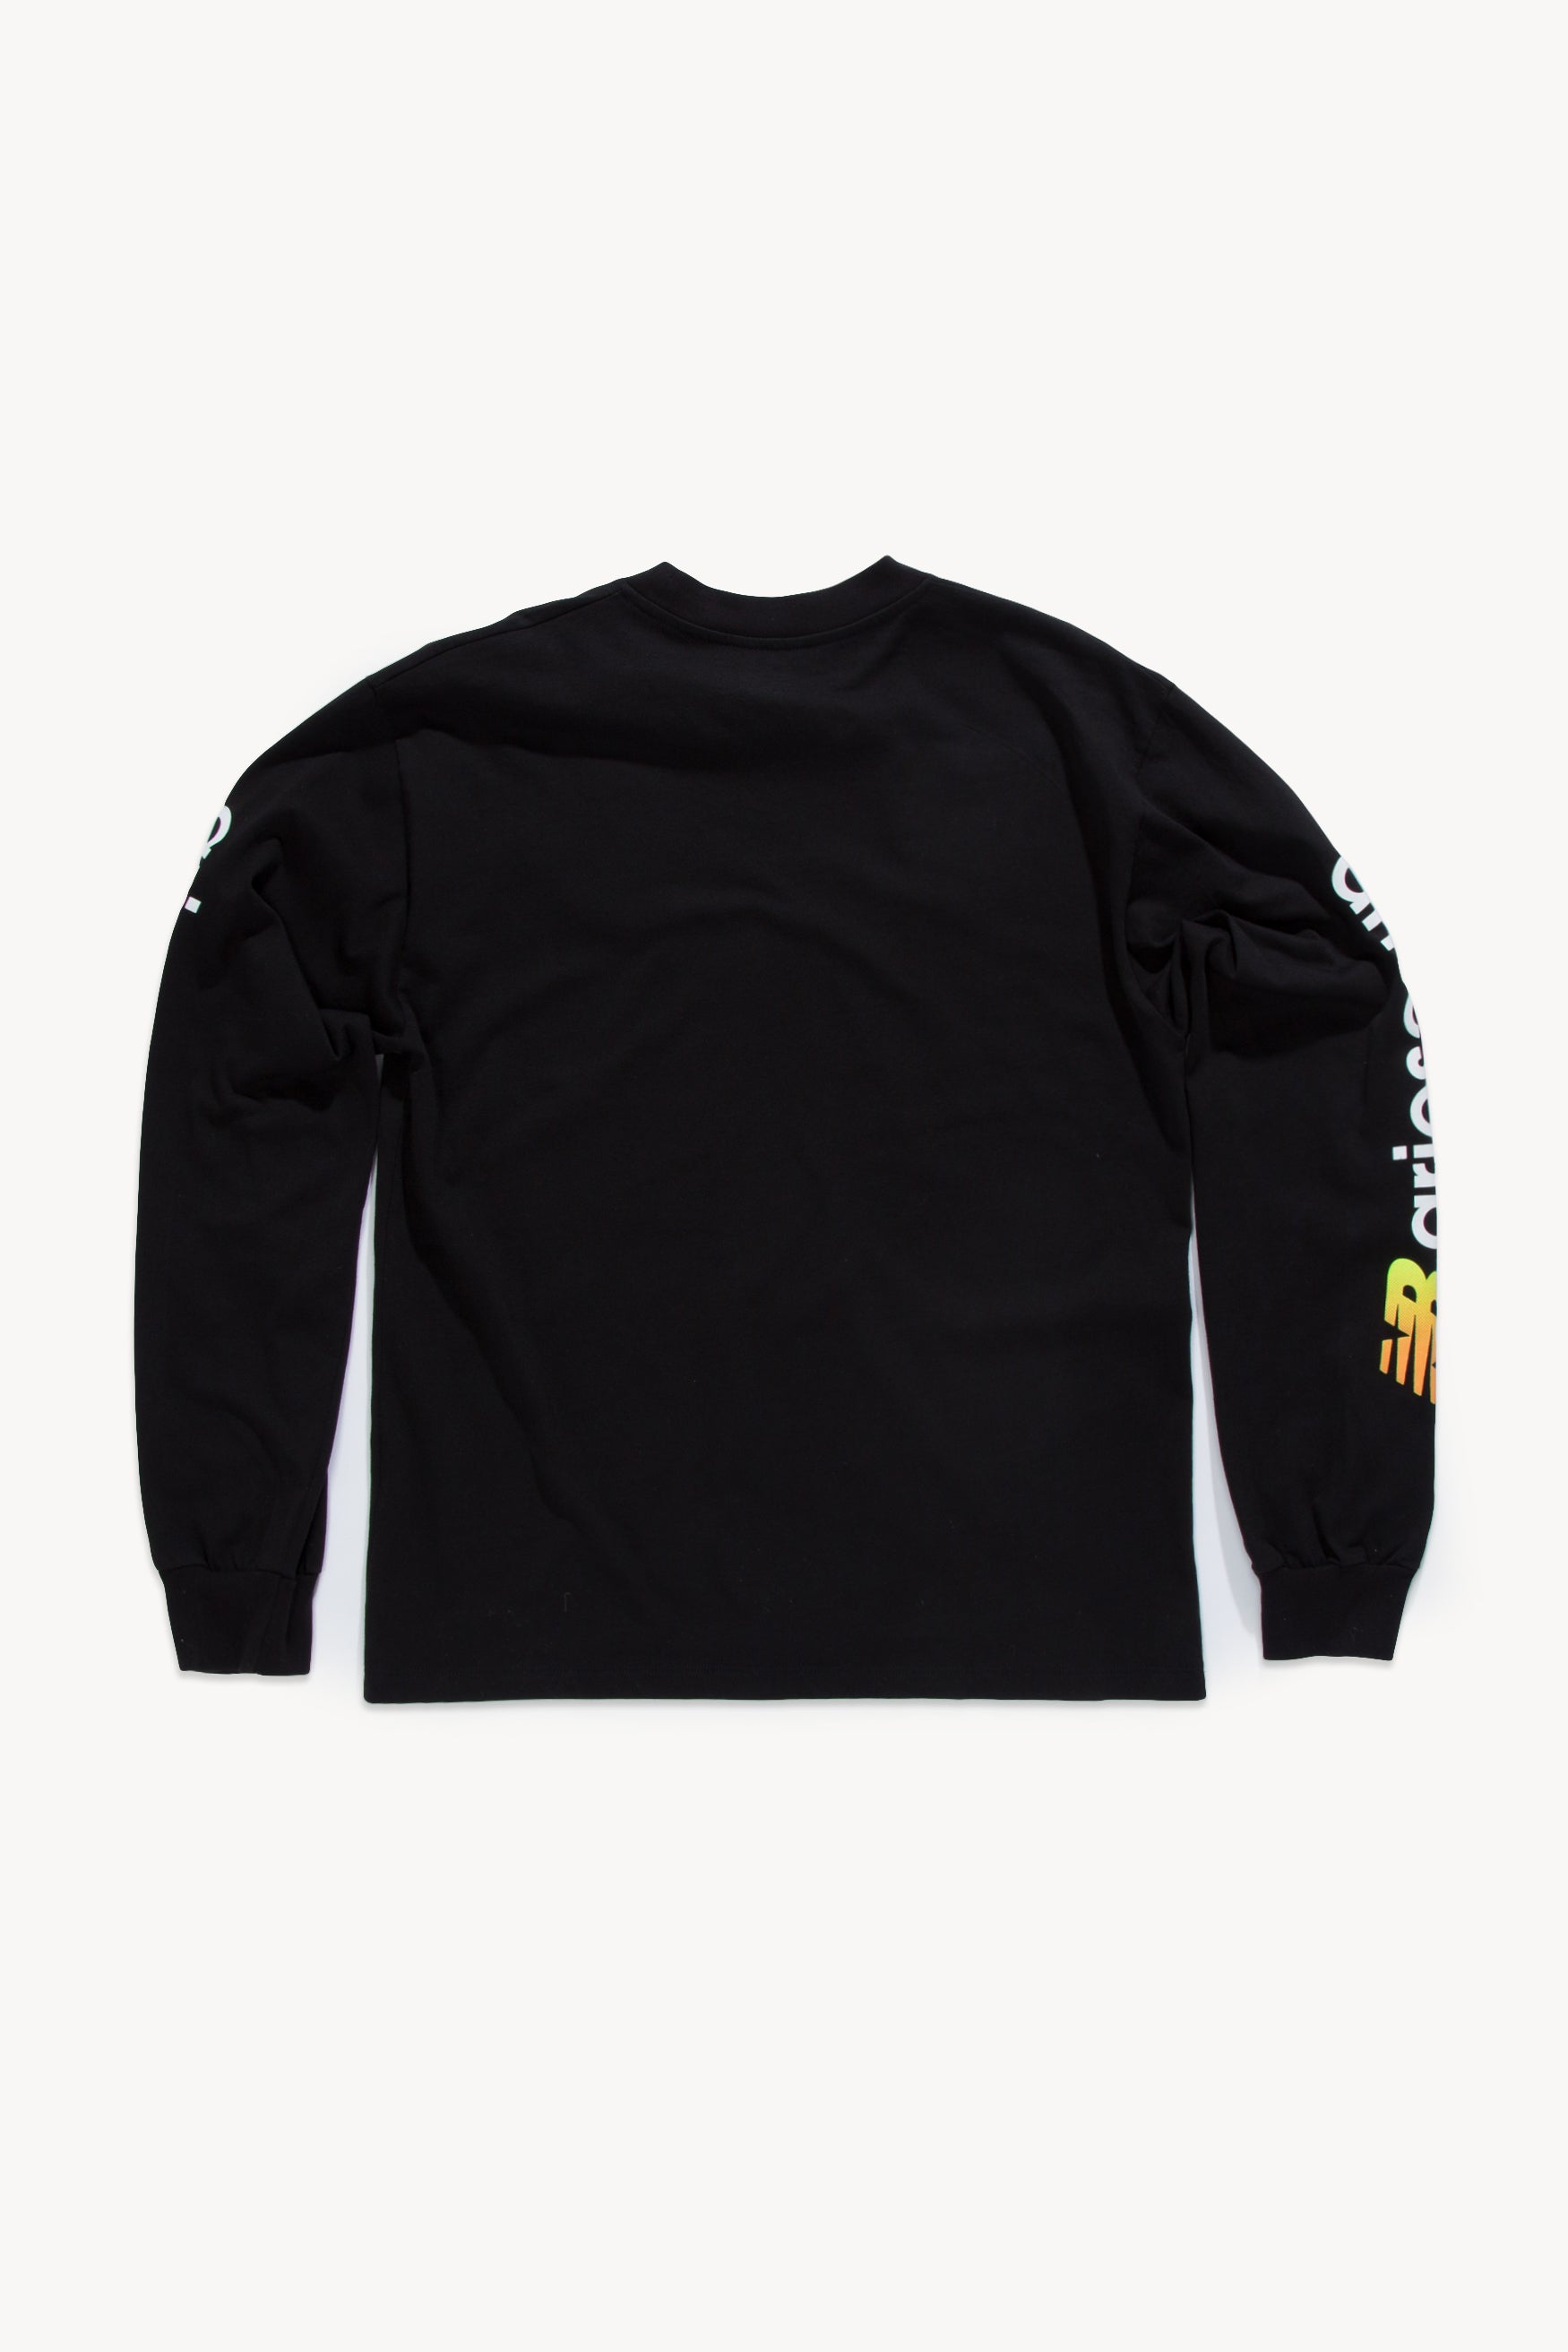 Load image into Gallery viewer, Aries x New Balance Longsleeve T